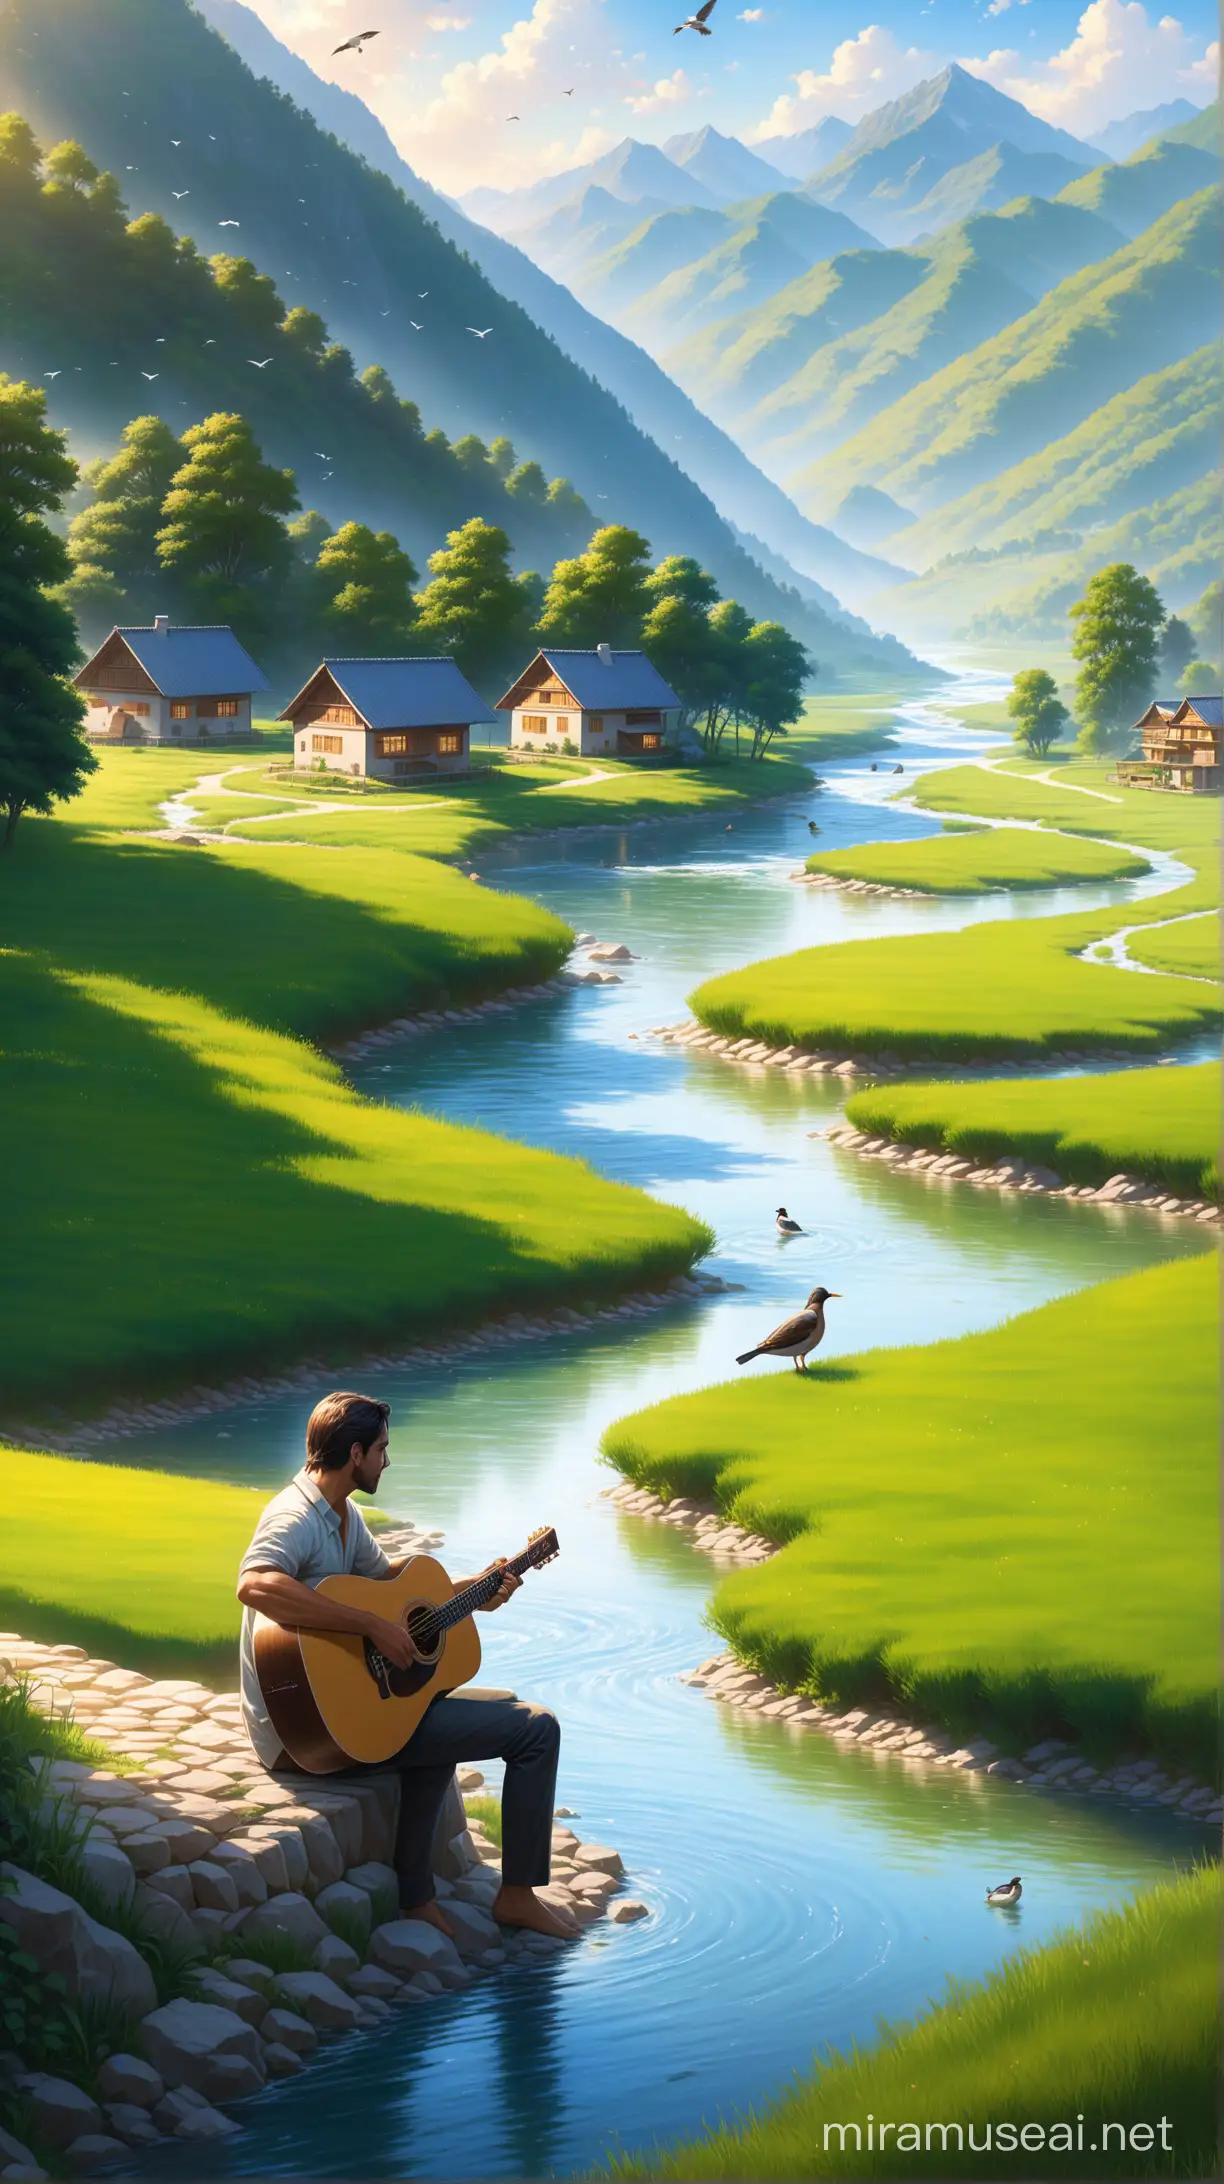 Man Playing Acoustic Guitar by Elegant House with Mountainous Nature and Clear River